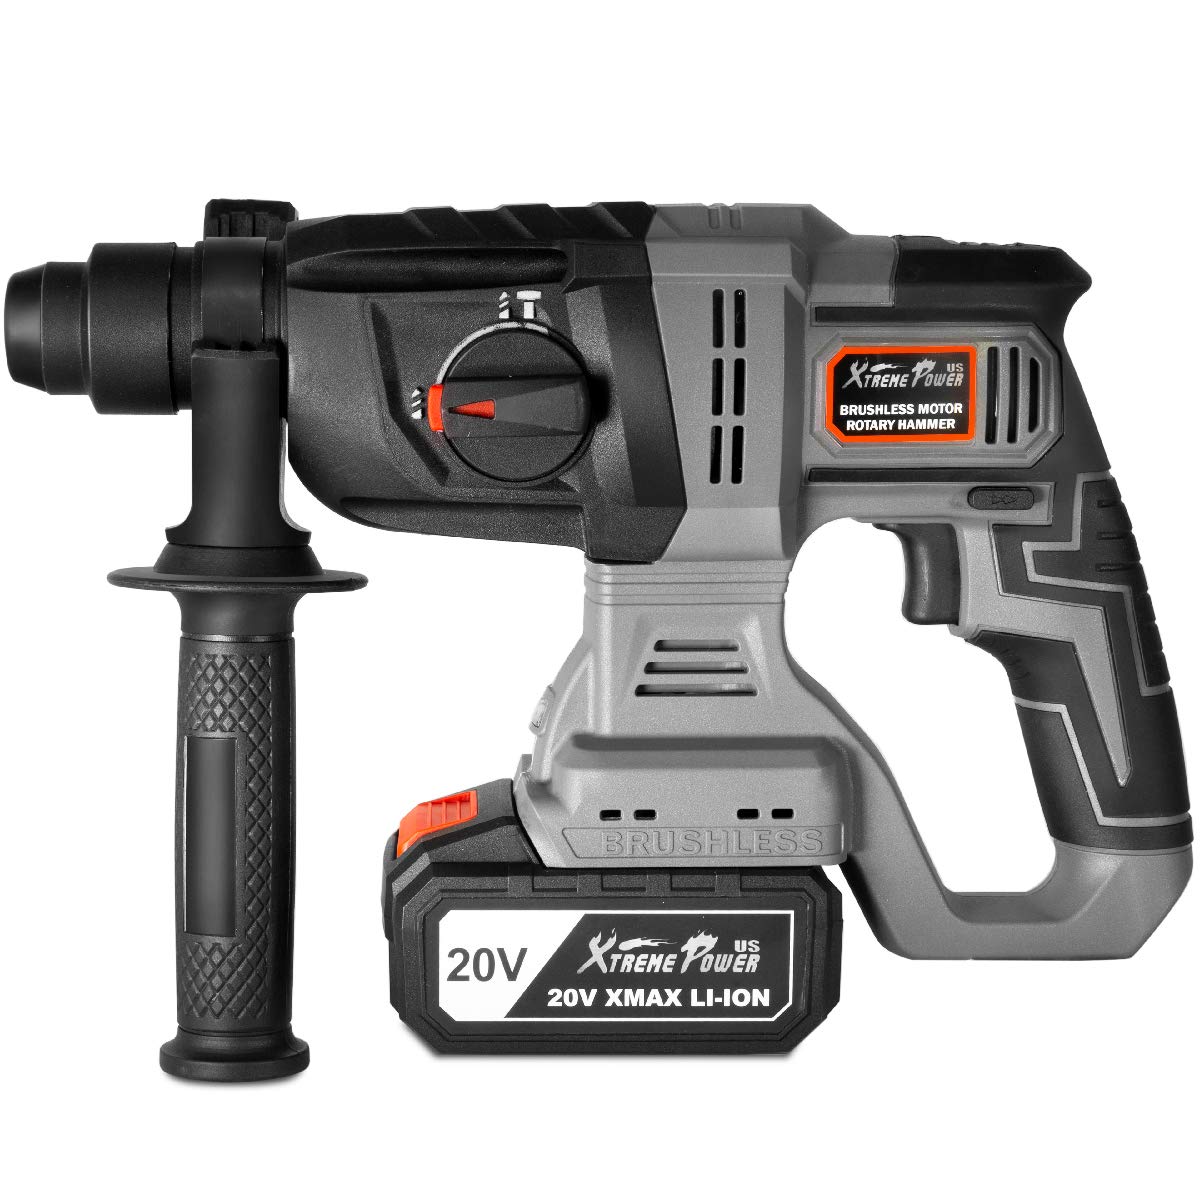 XtremepowerUS 20V Max SDS Plus Rotary Hammer Drill Brushless Cordless Demolition Hammer with 4.0Ah Lithium Battery and Charger